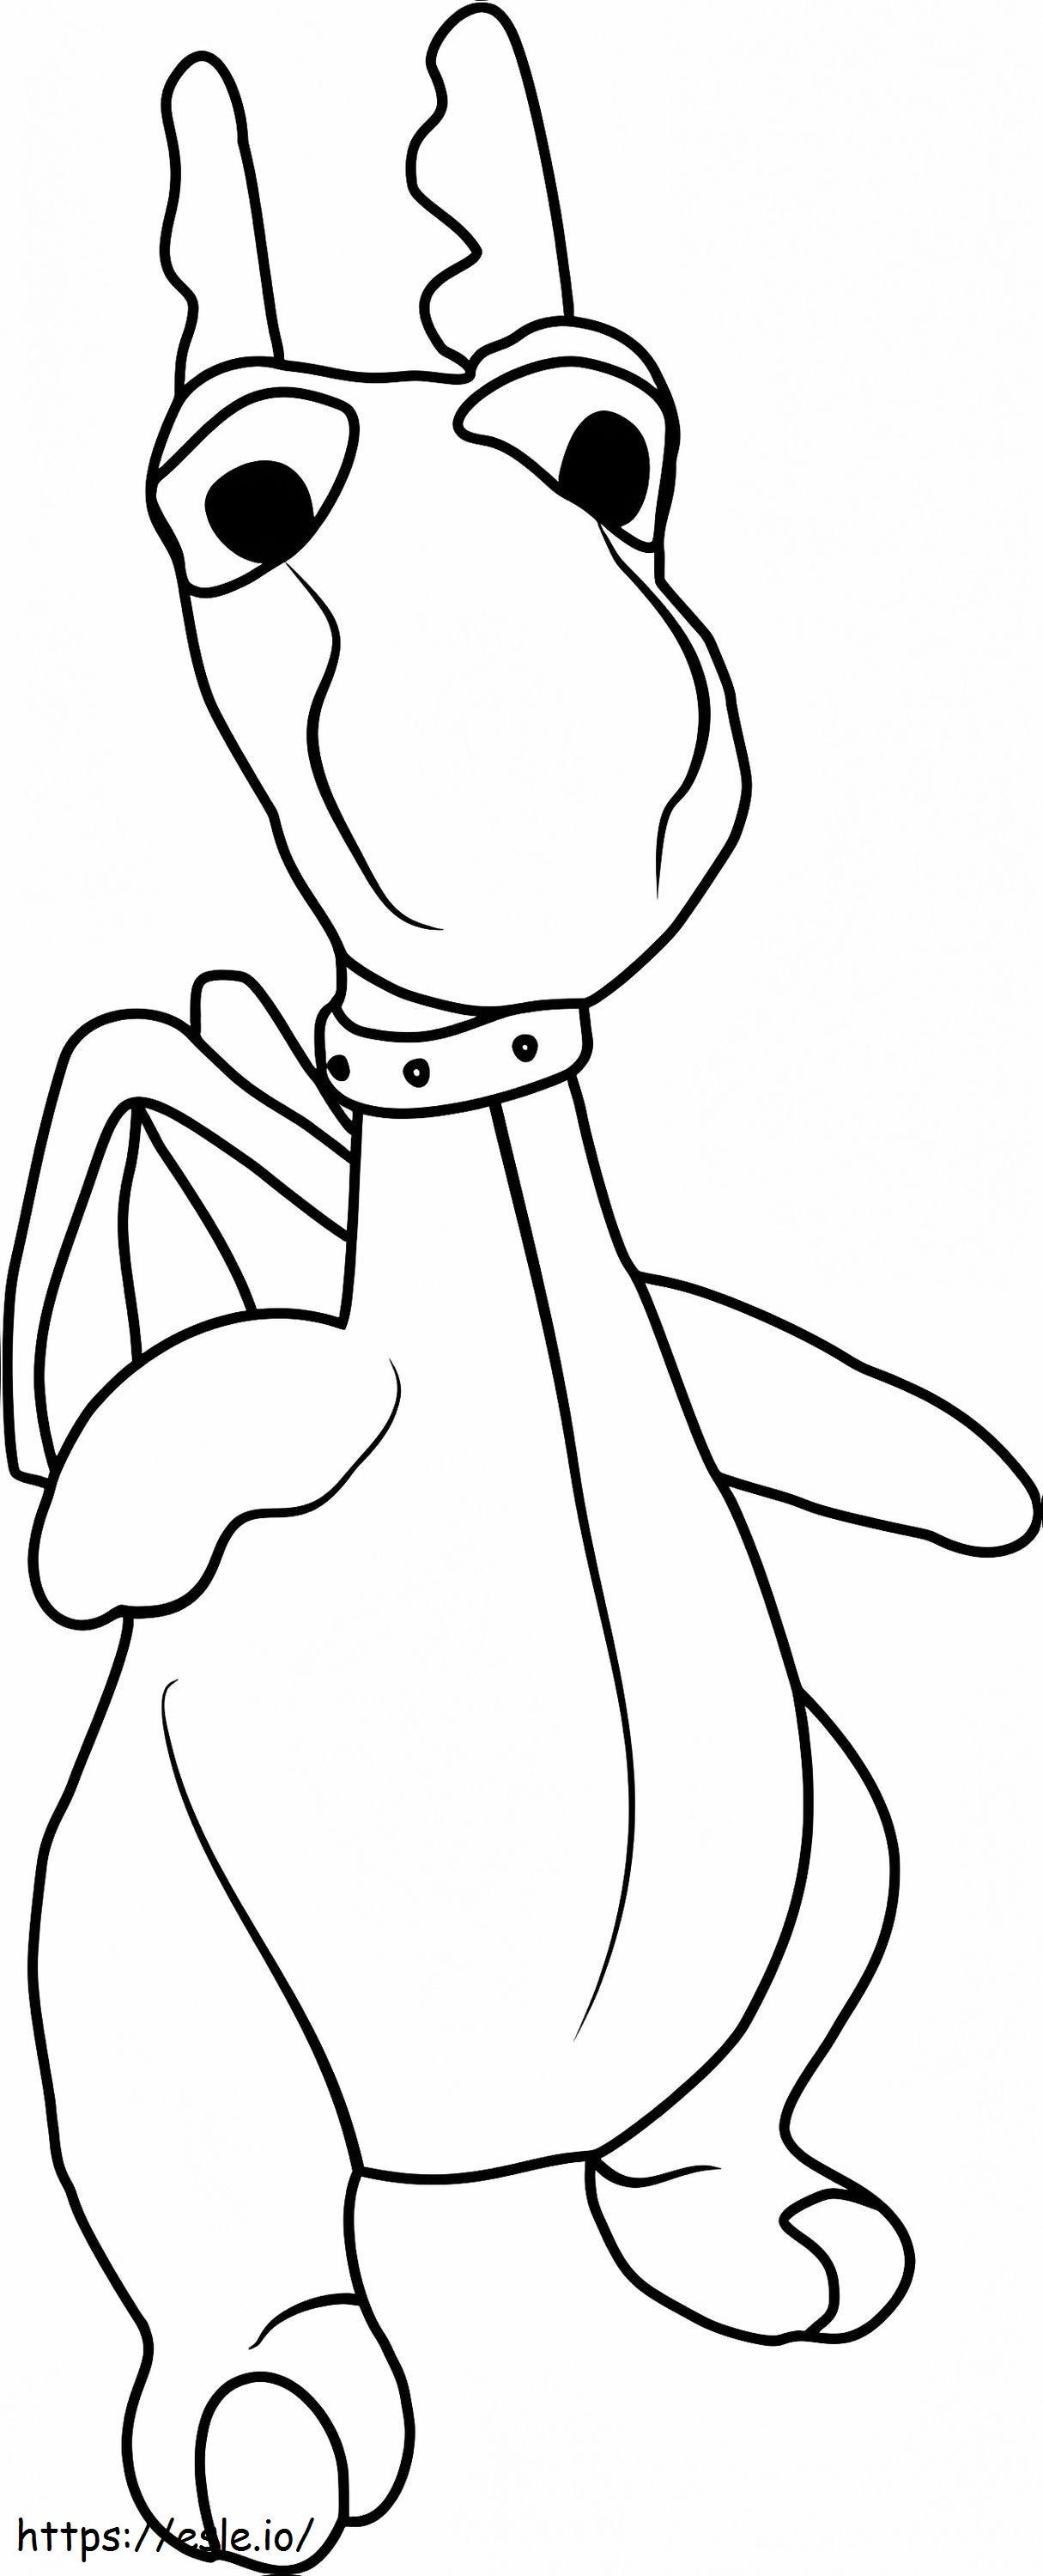 1531361321 Stuffy Philbert A4 coloring page